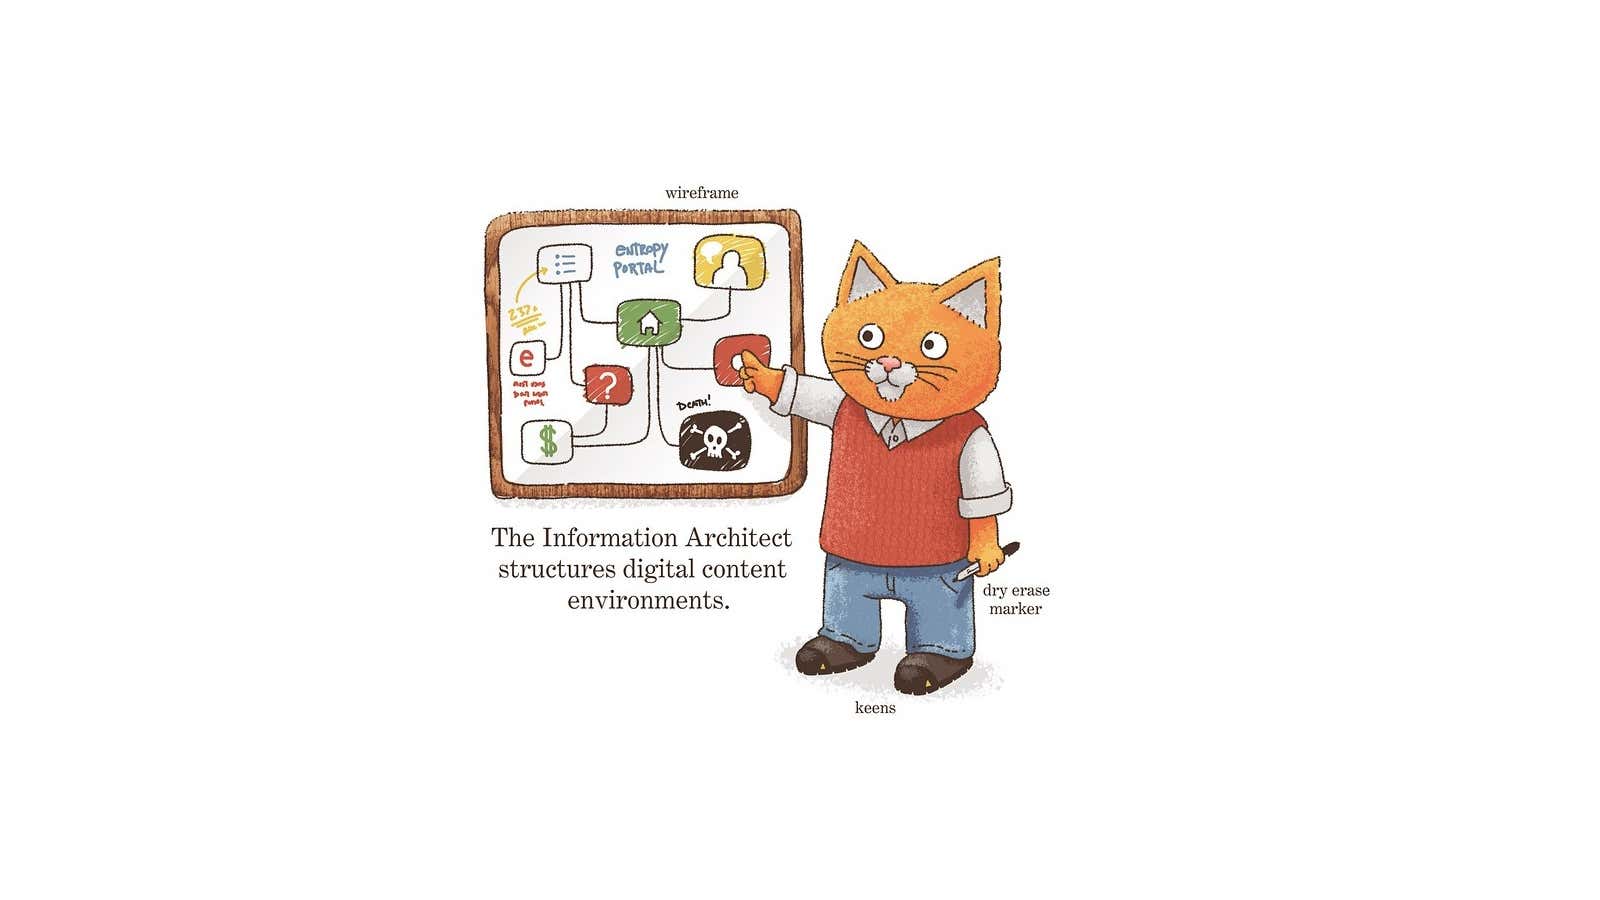 Here’s what Silicon Valley would look like if it were run by cartoon animals